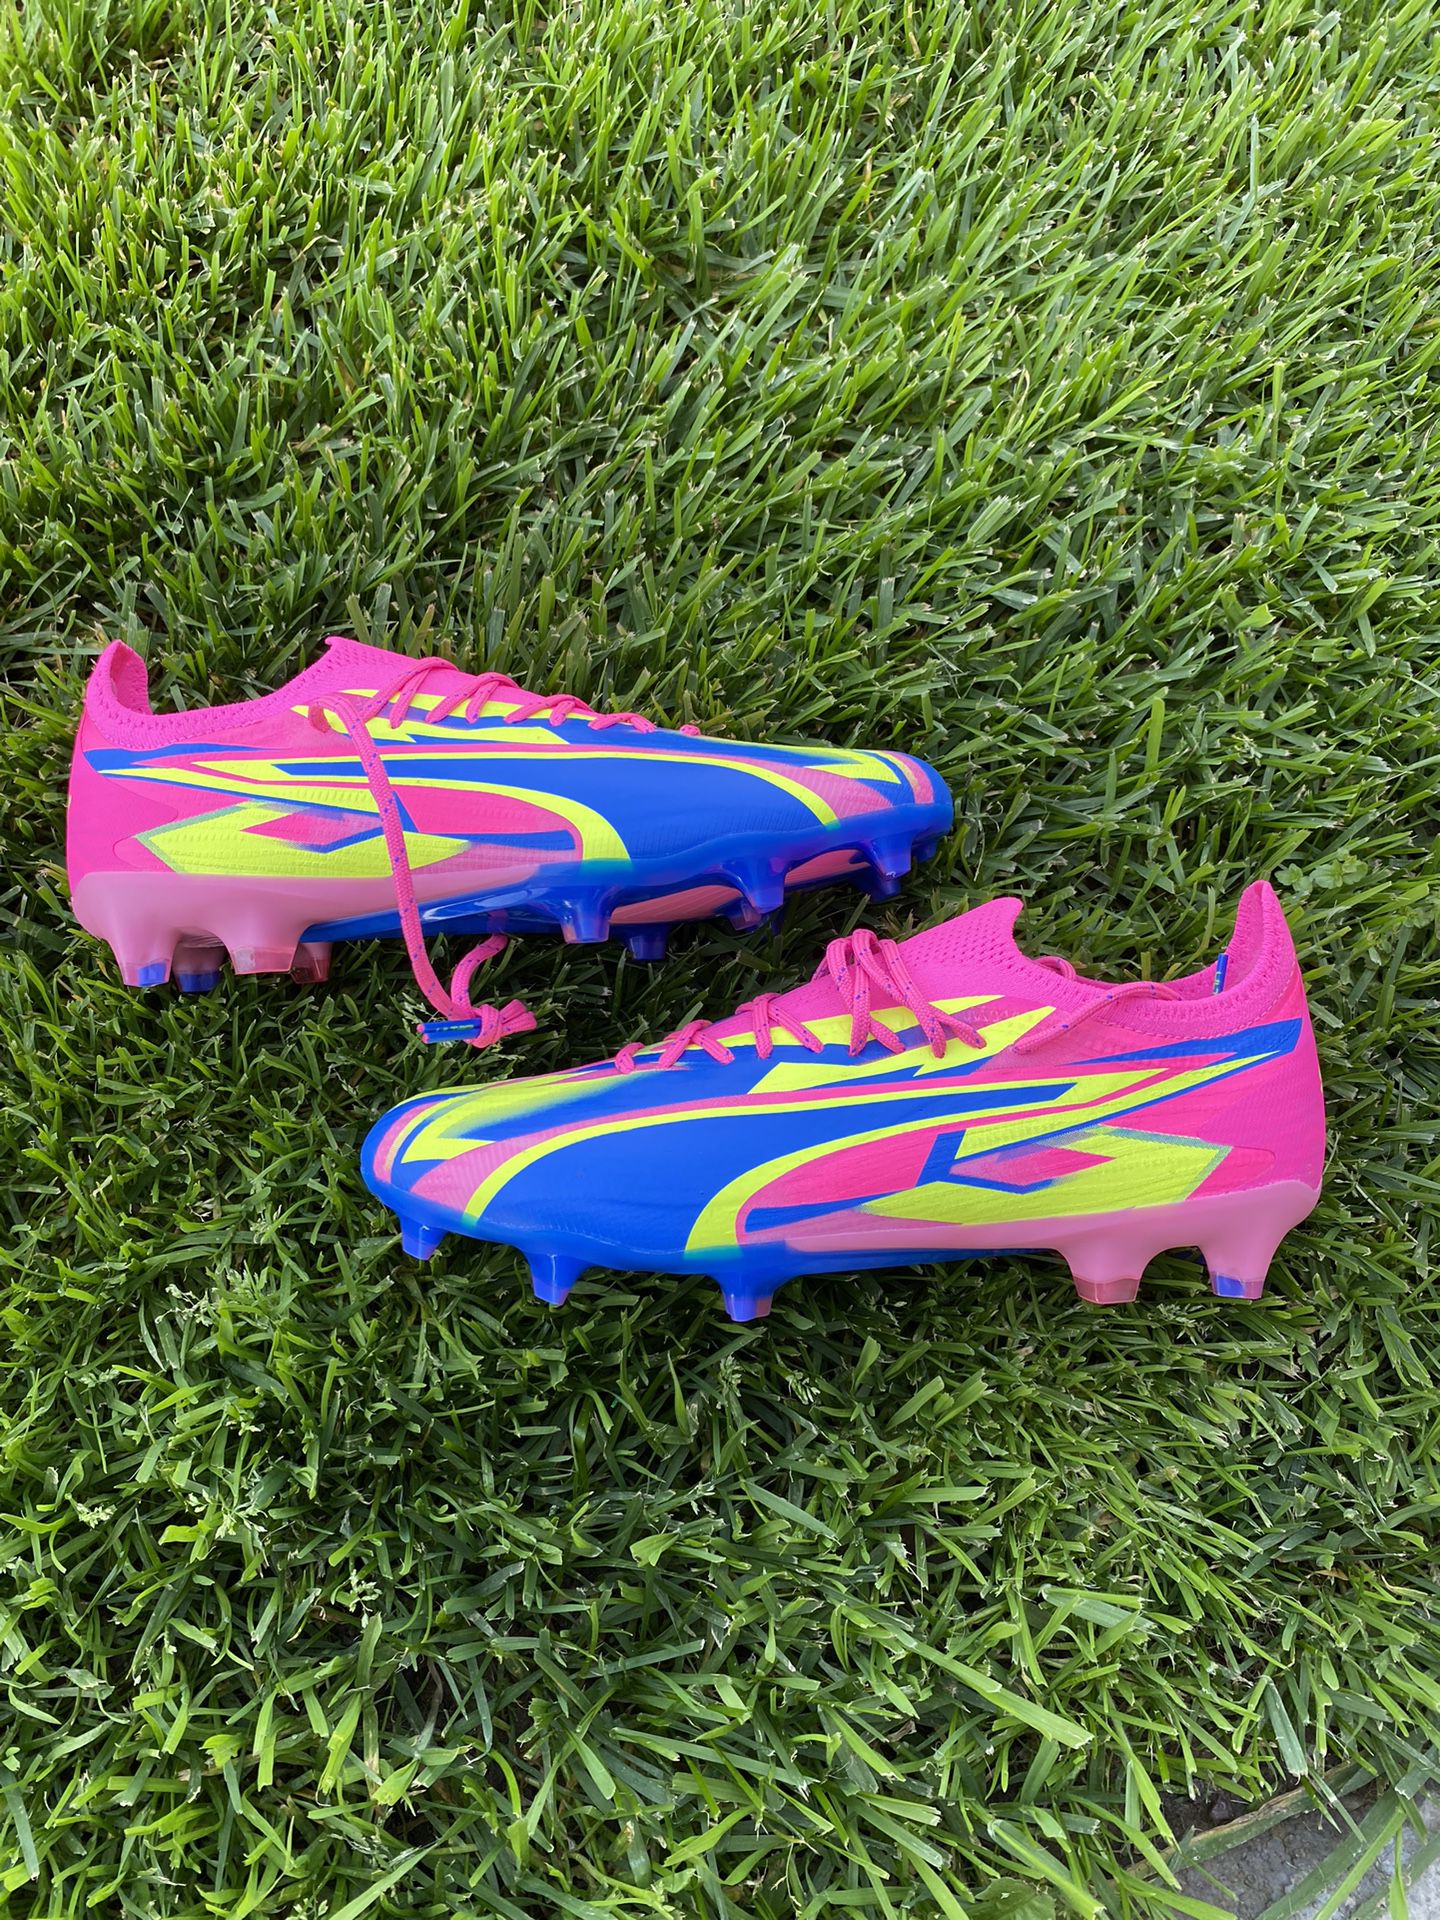 Pumas Ultra Ultimate FG AG “Energy Pack” Willing To Take Offers